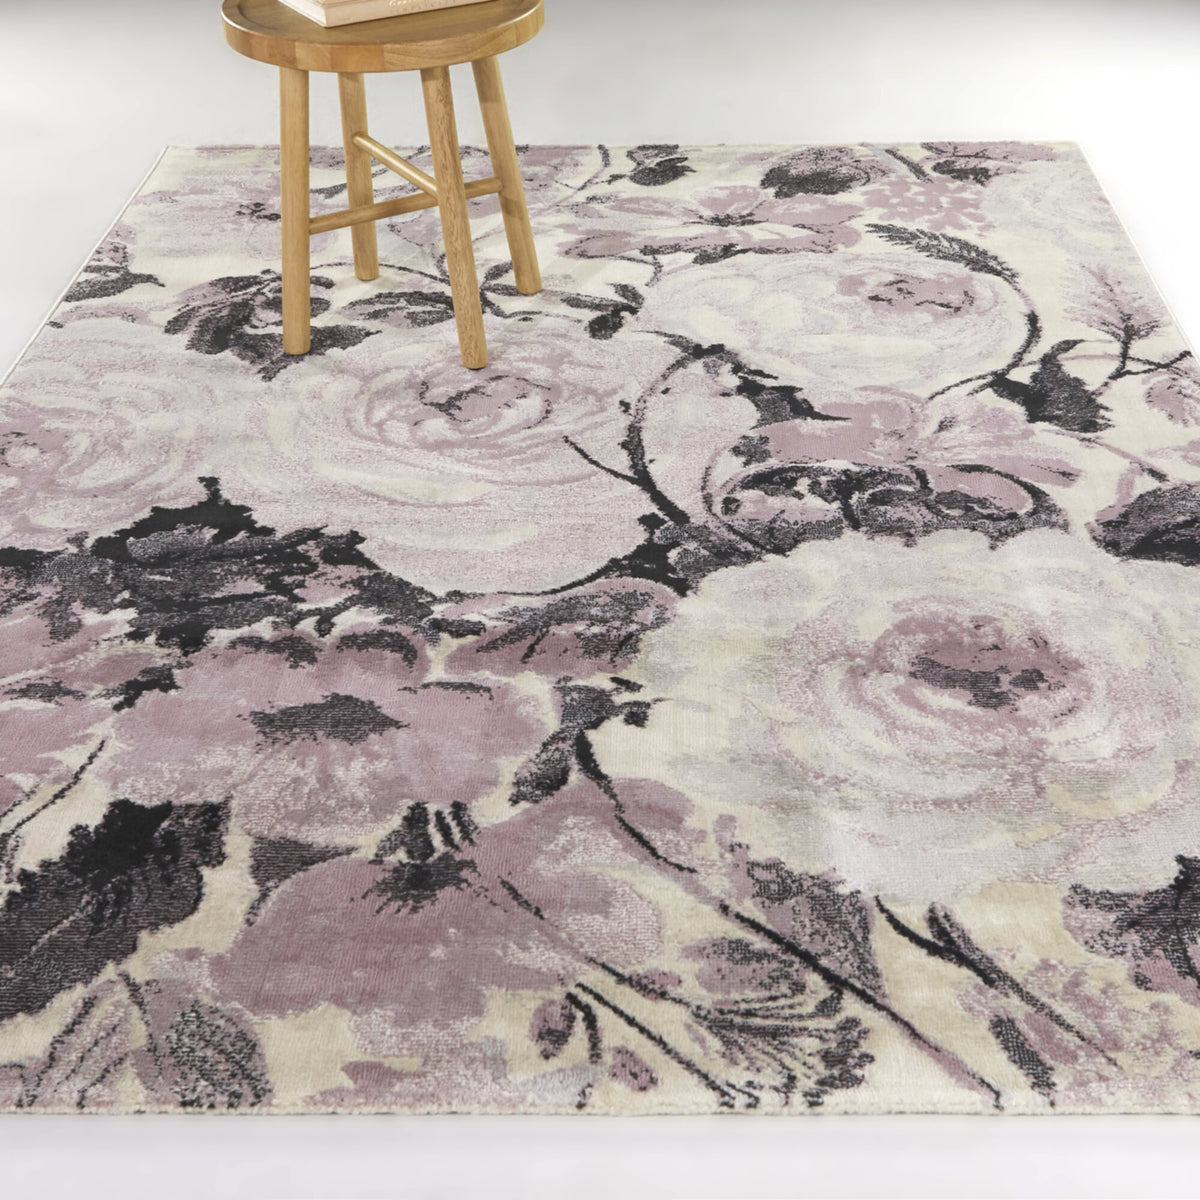 Edna Classic Floral Area Rug